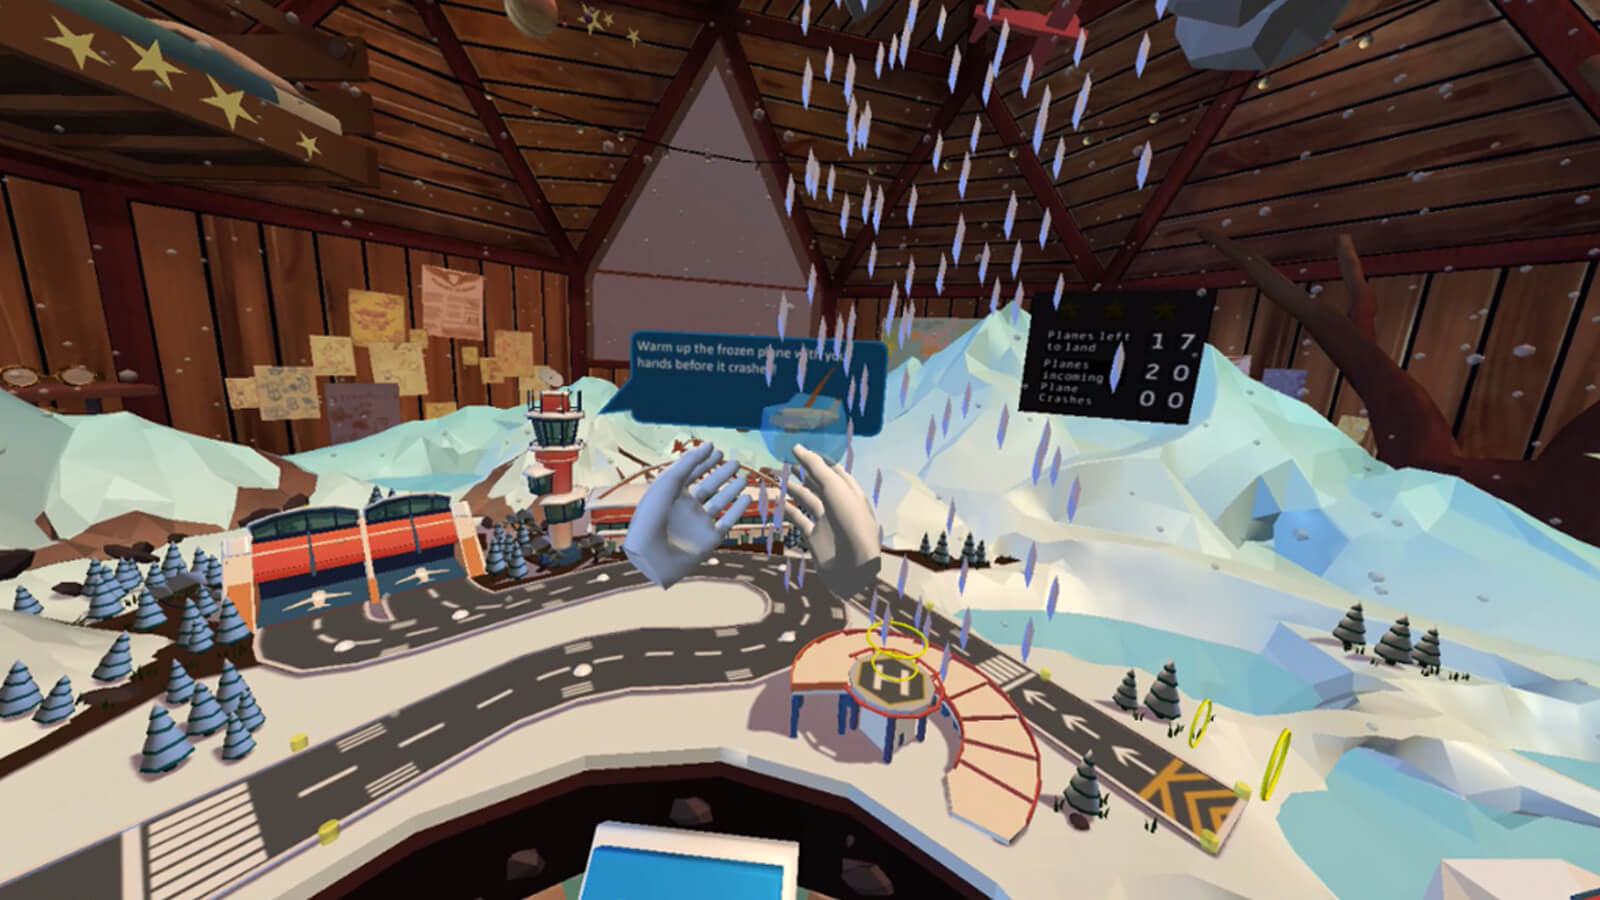 A miniaturized airport is pelted by show with an icy mountain int he background